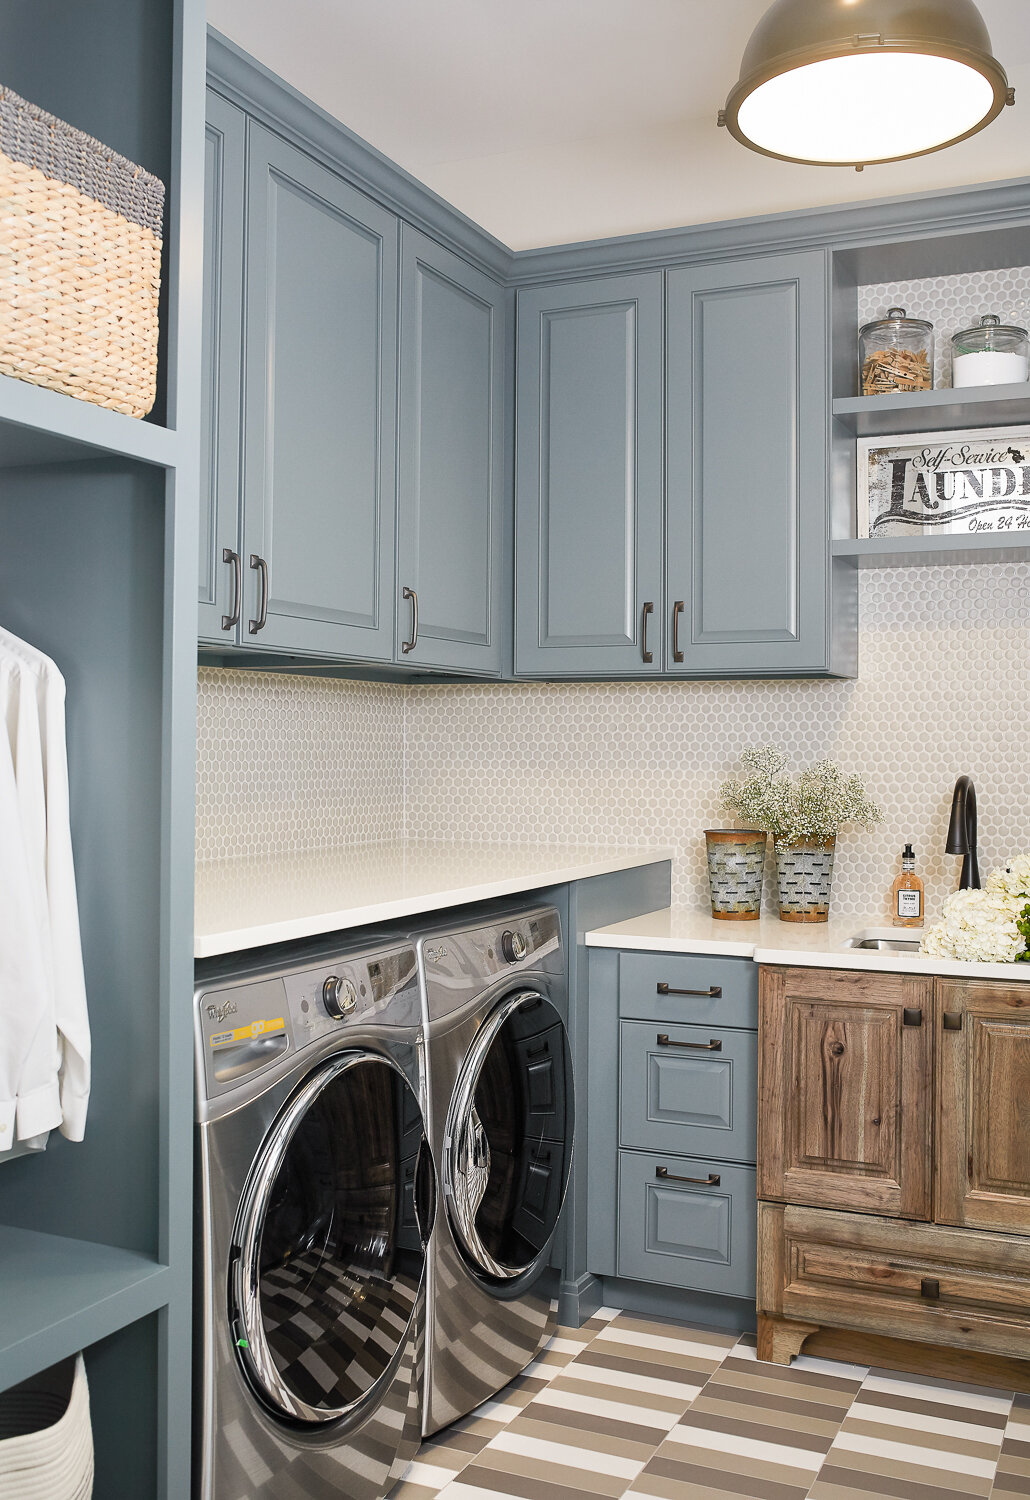 Creating A Dream Laundry Room - The Cabinet en-Counter